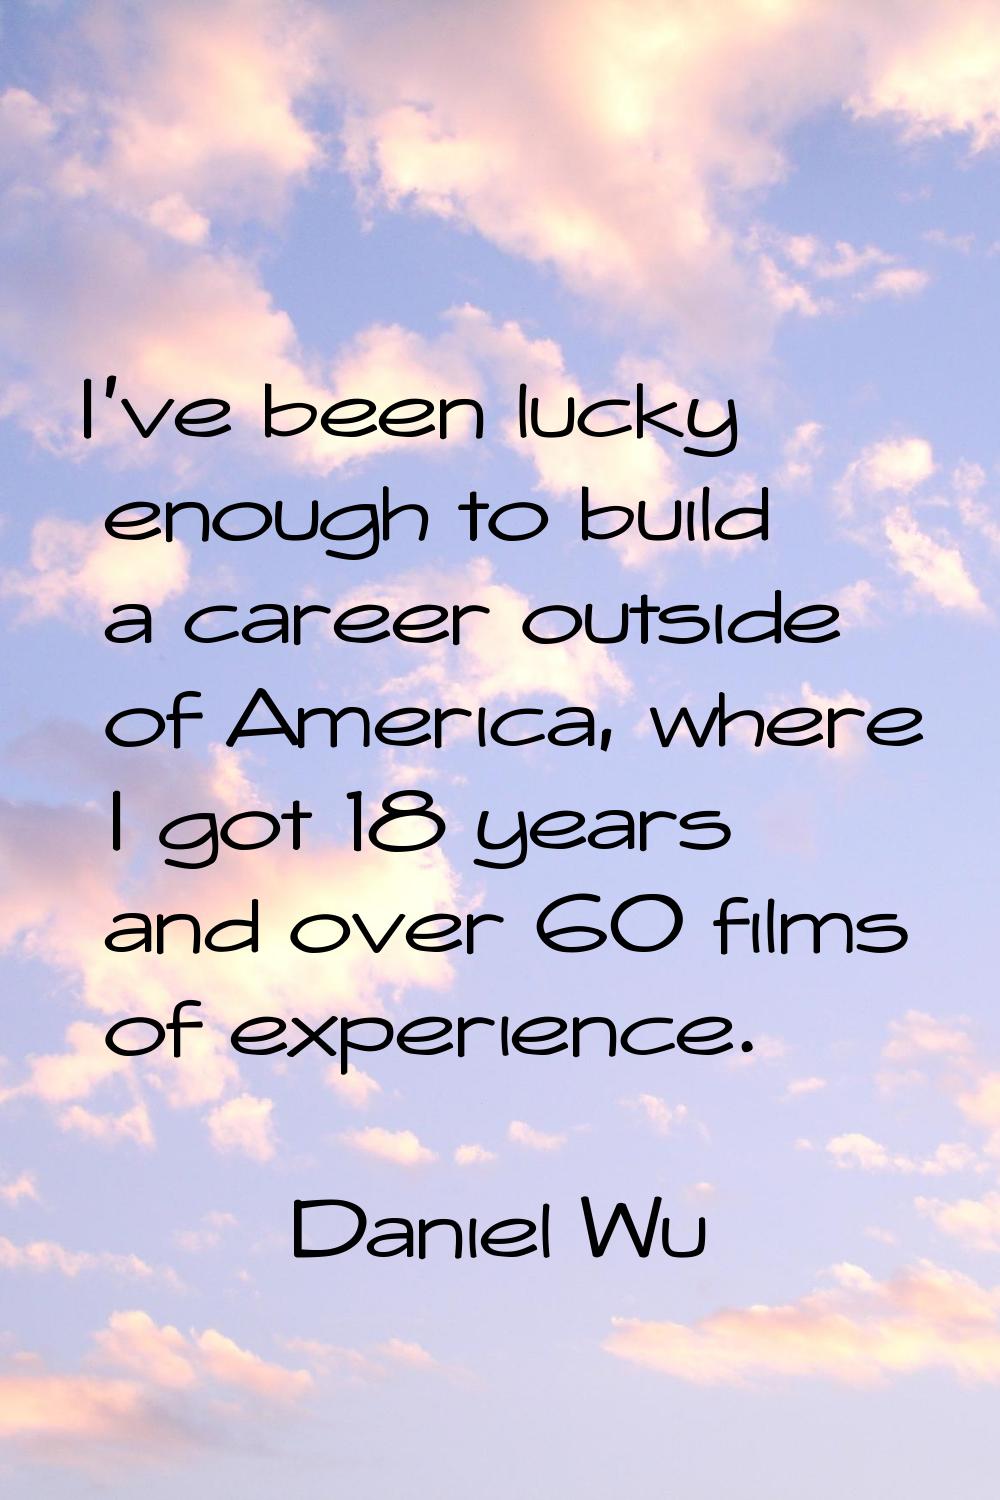 I've been lucky enough to build a career outside of America, where I got 18 years and over 60 films